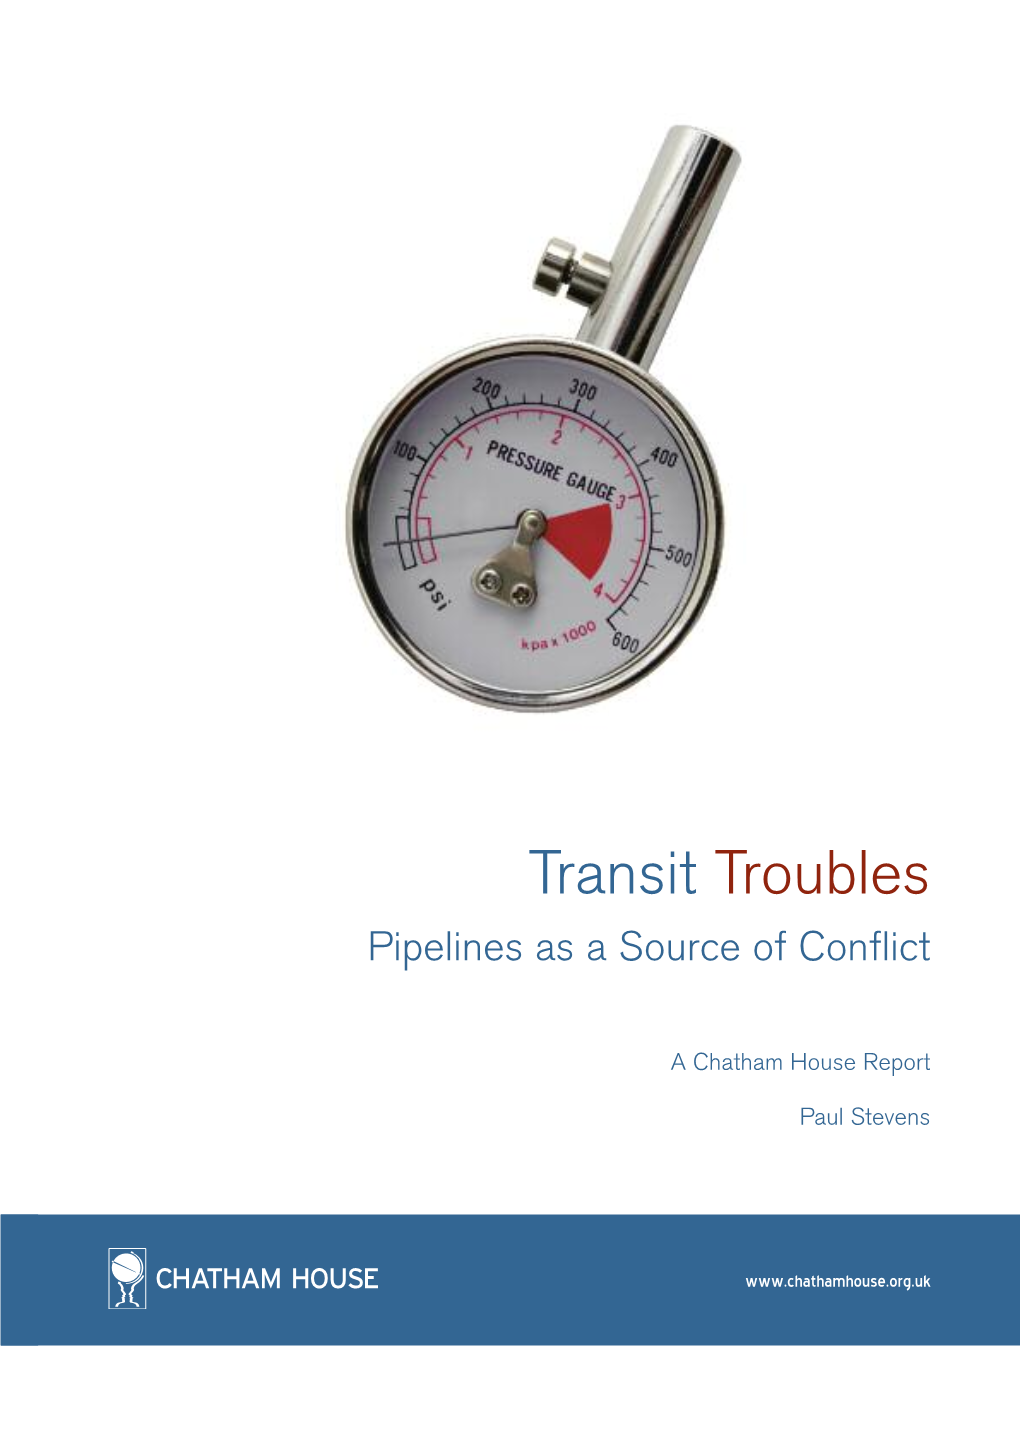 Transit Troubles Pipelines As a Source of Conflict